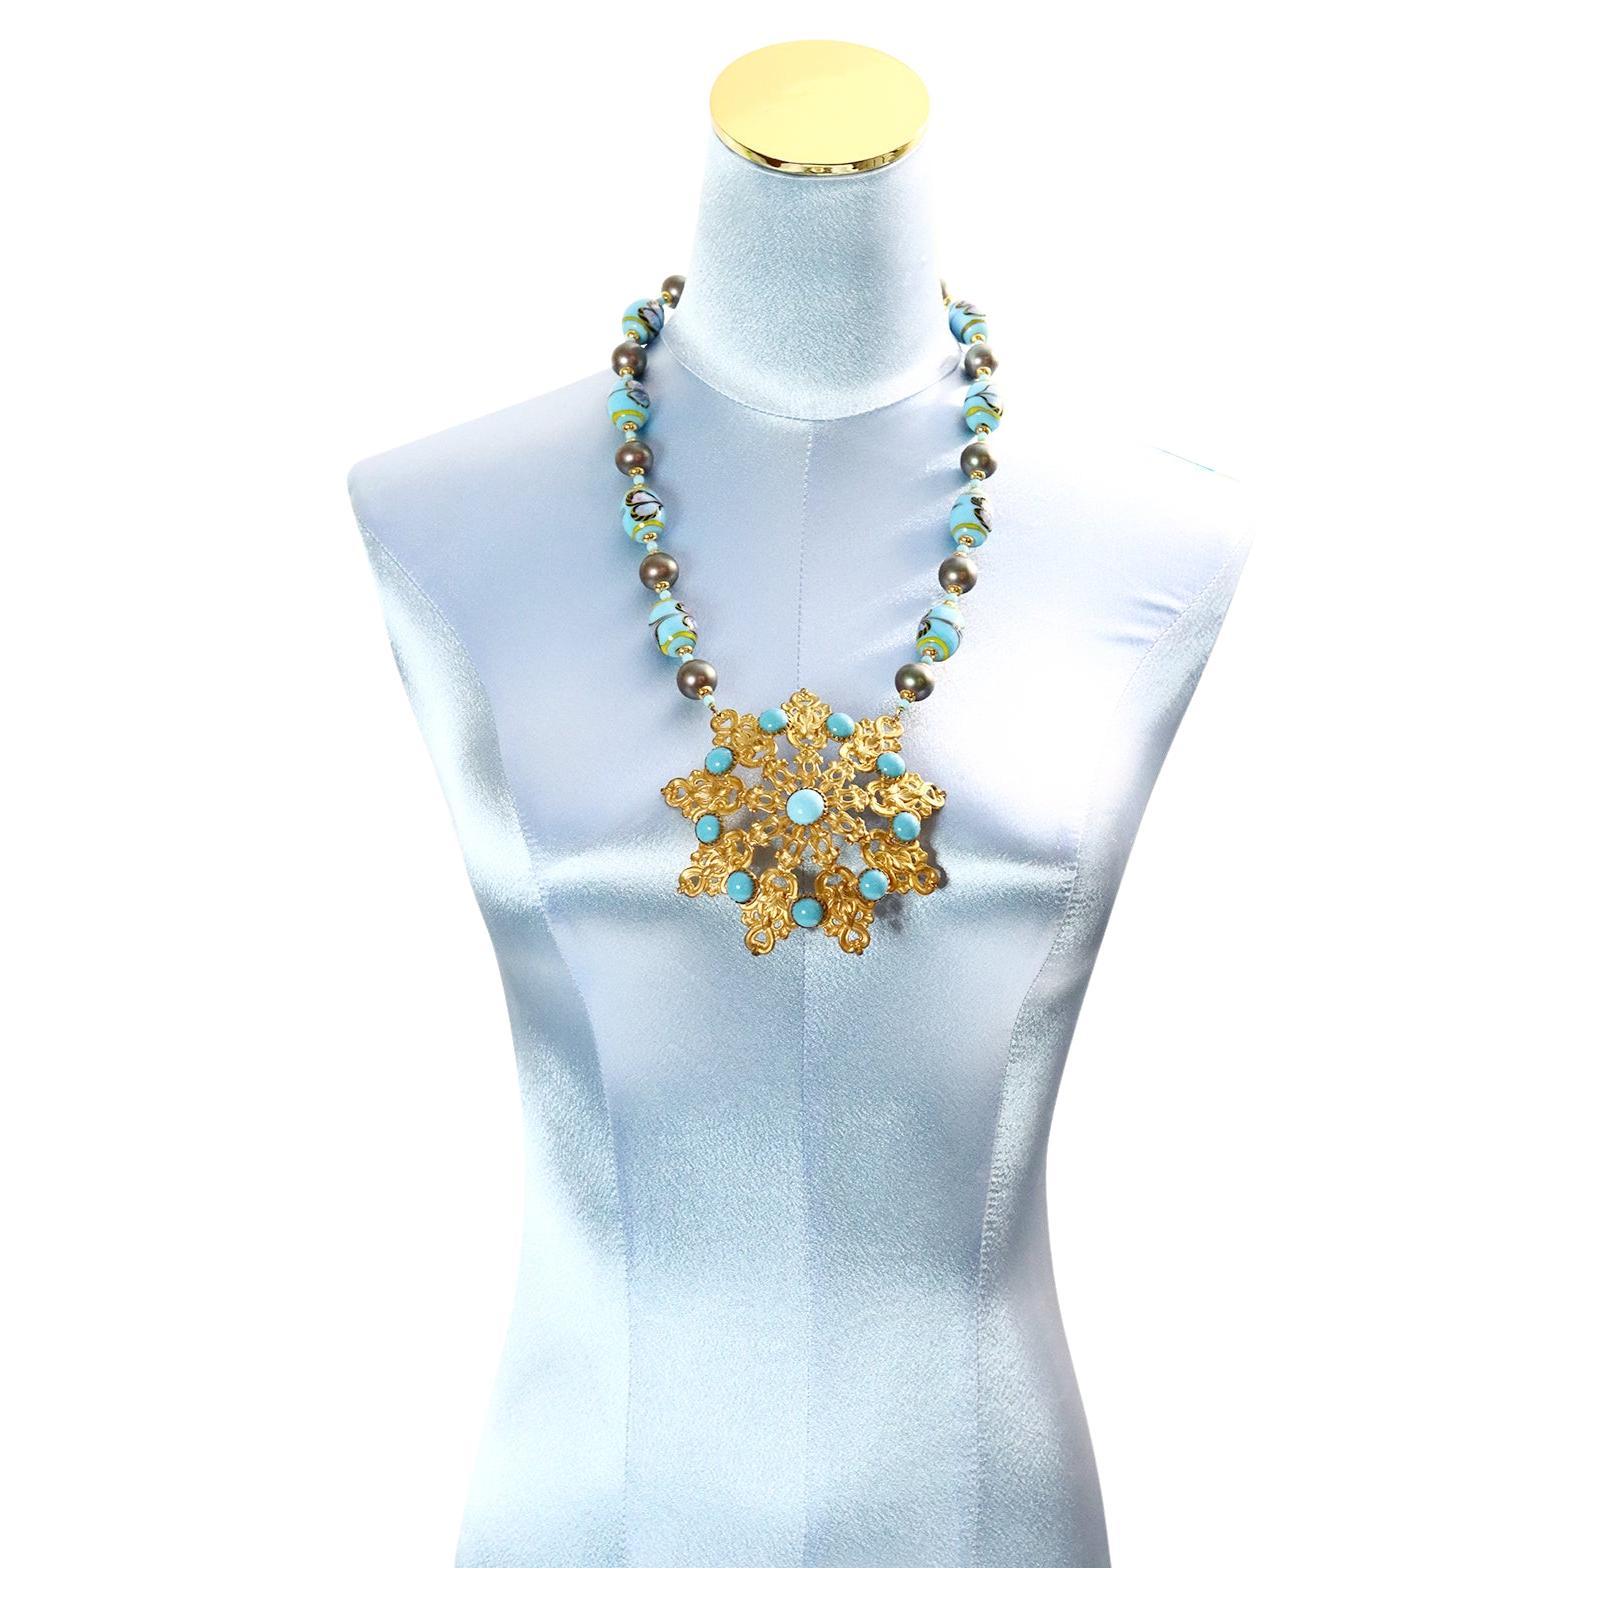 Vintage Gold Tone Large Disc with Faux Turquoise Glass Beads. Will look great on many colors. Aquired in Paris.  Necklace portion is 22